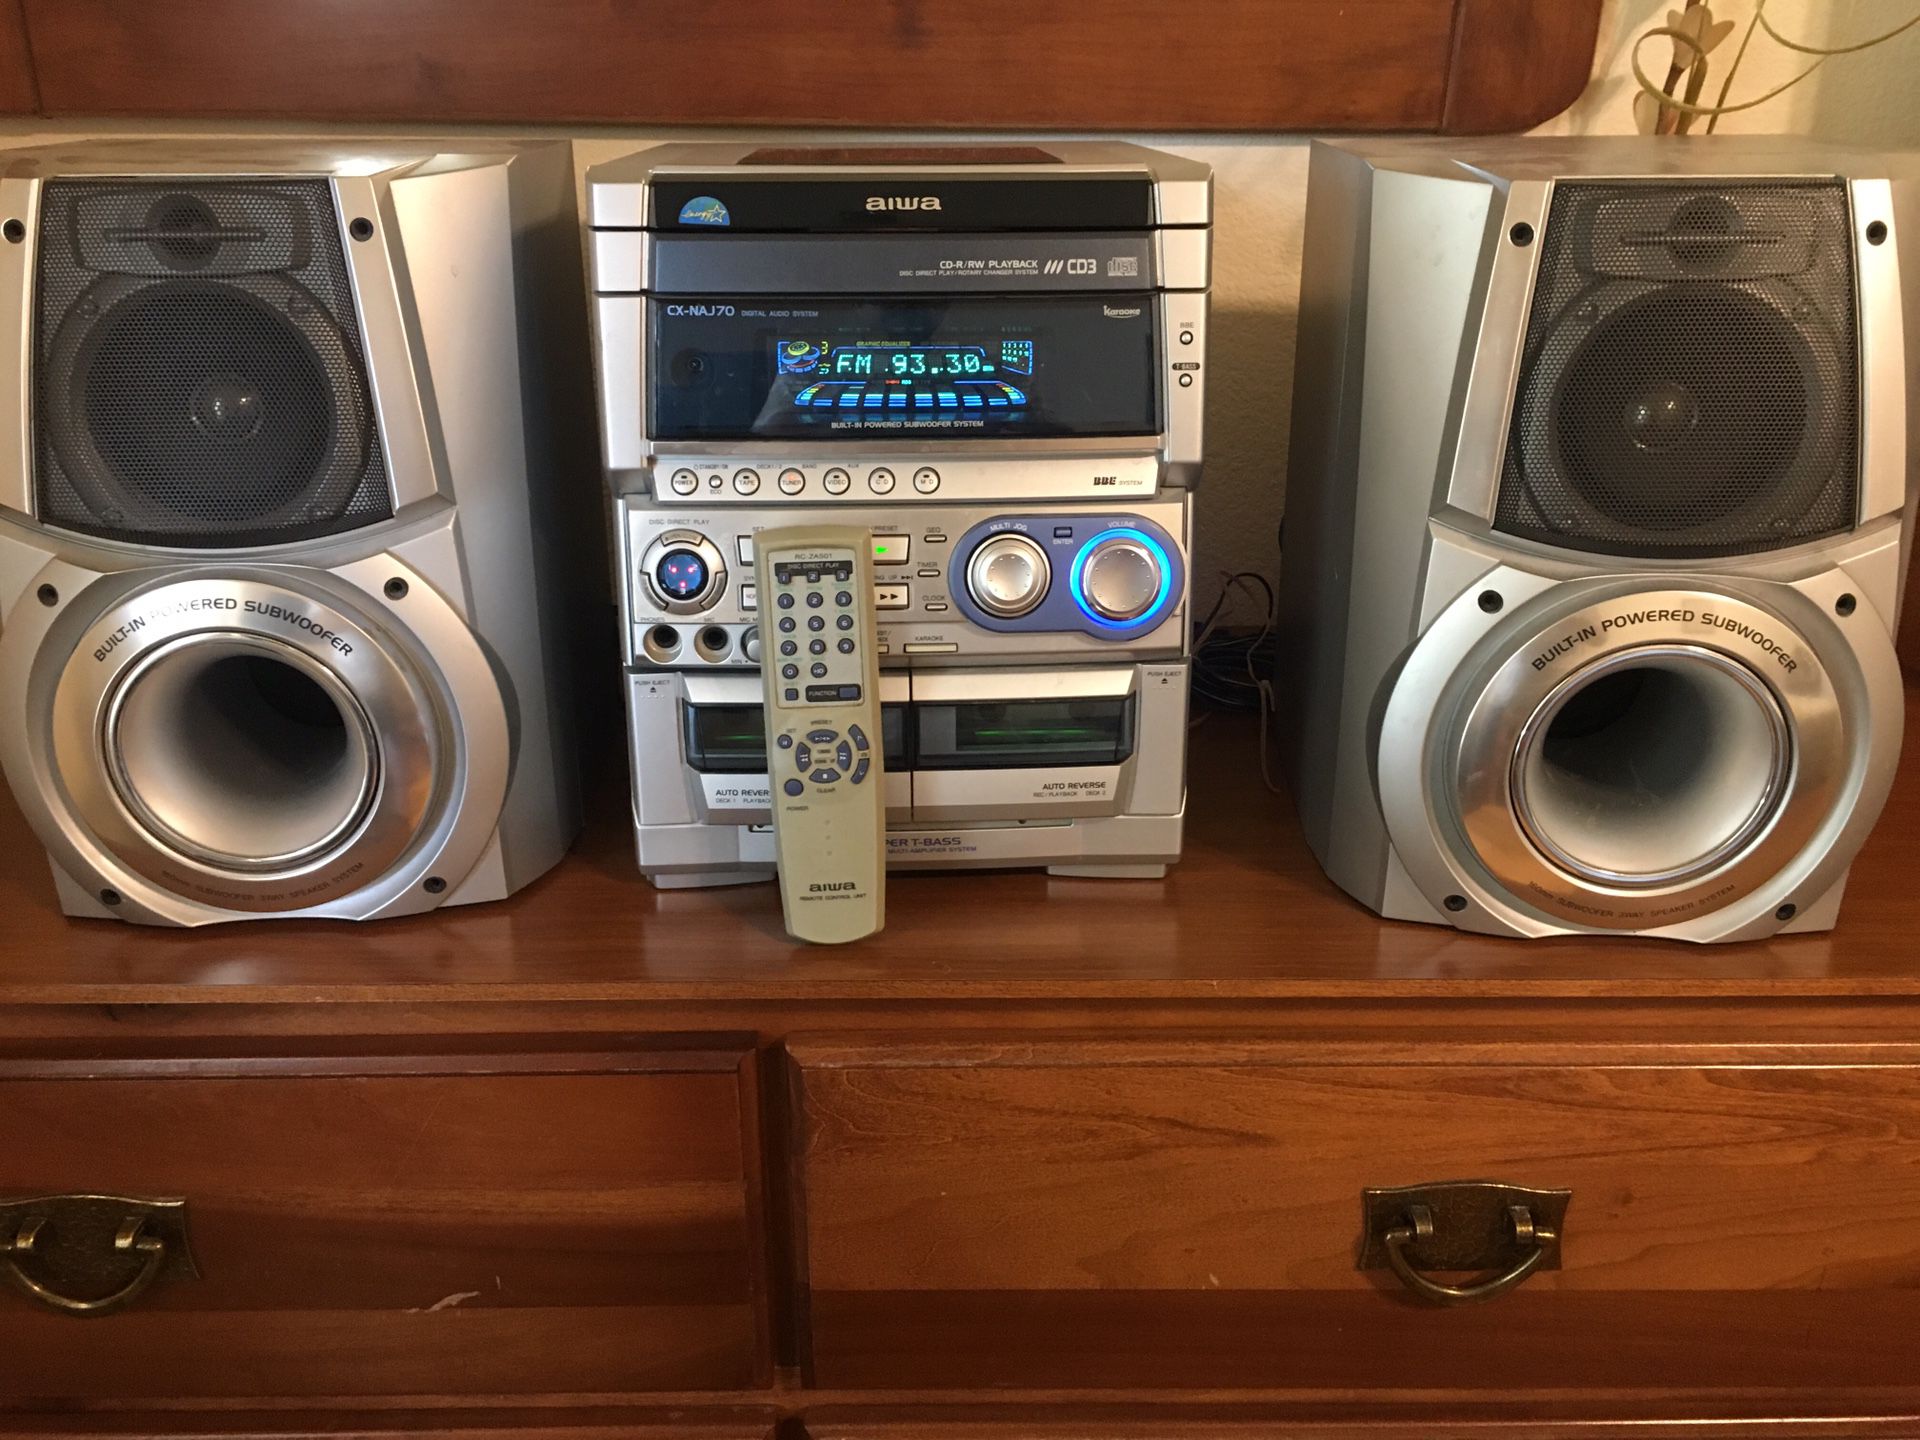 AIWA STEREO SYSTEM has speakers with subwoofer.